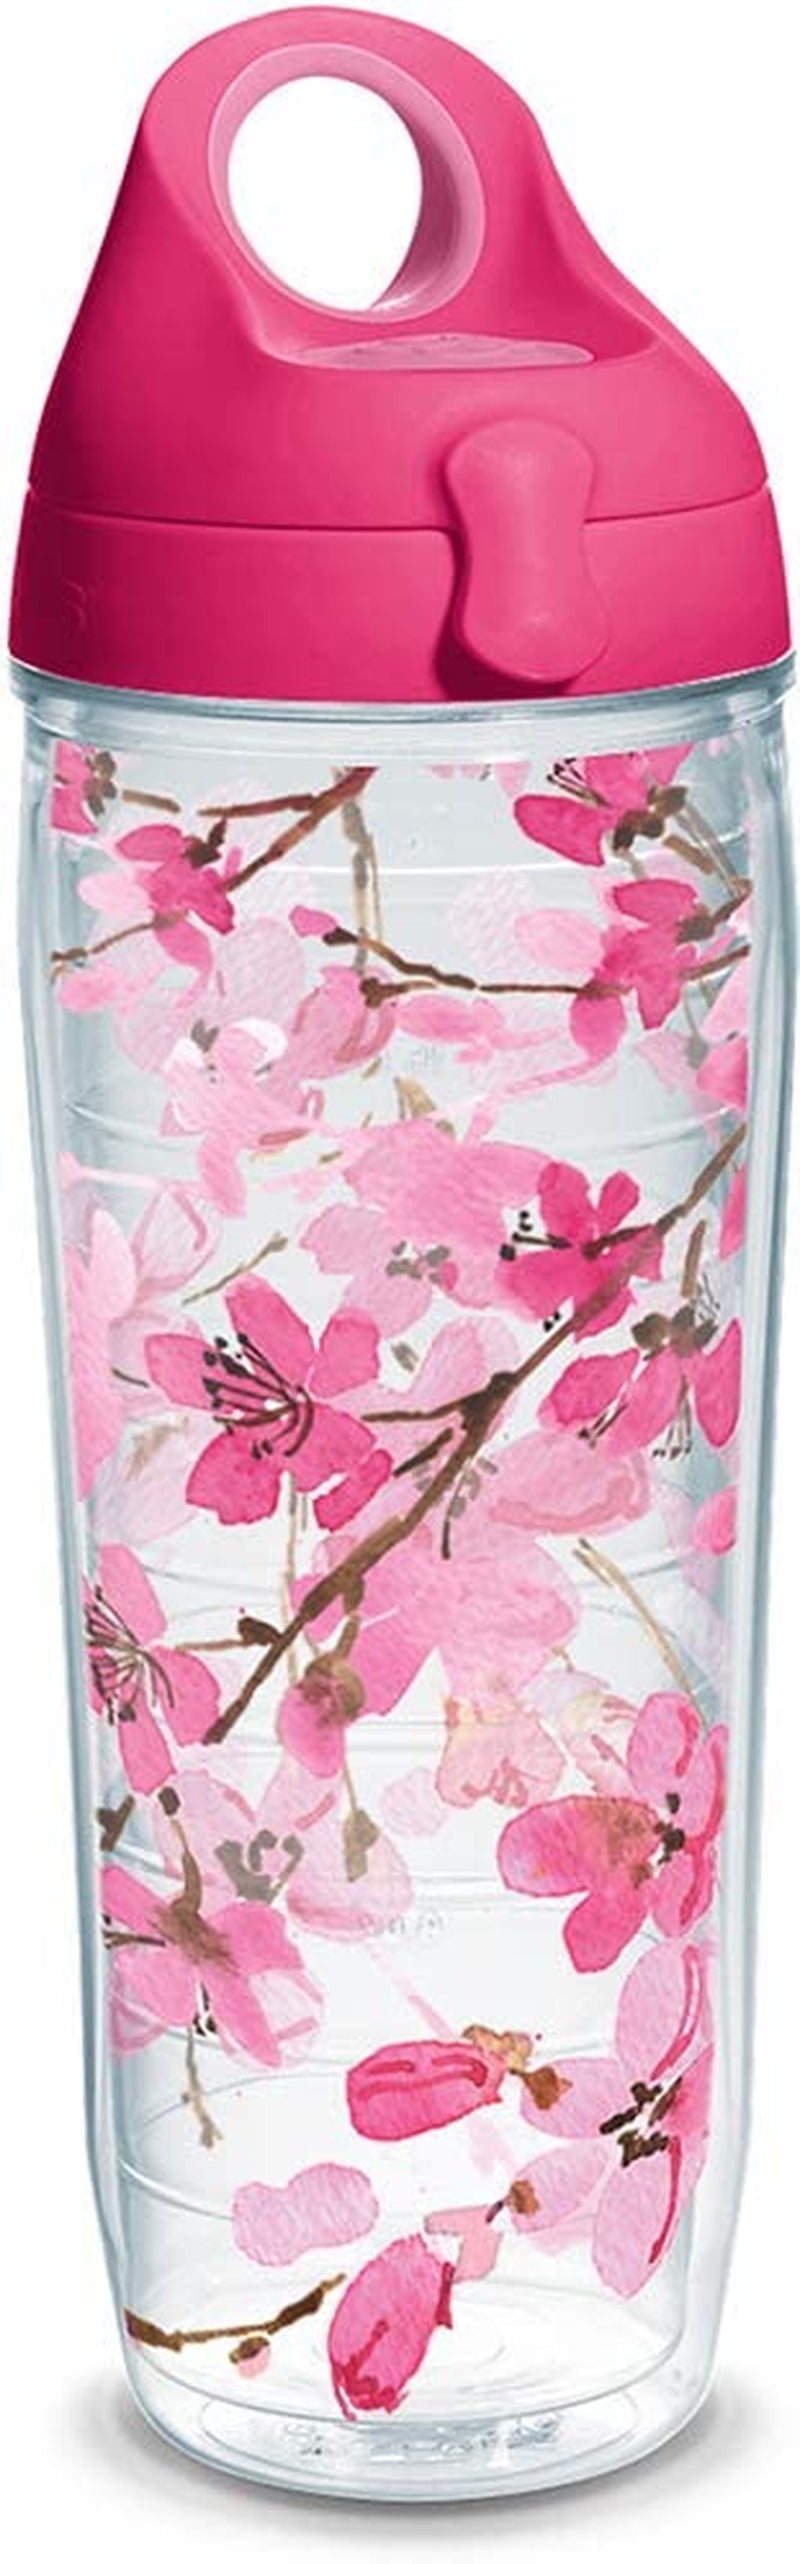 Tervis Made in USA Double Walled Sakura Japanese Cherry Blossom Insulated Tumbler Cup Keeps Drinks Cold & Hot, 24Oz, Classic - Lidded Home & Garden > Kitchen & Dining > Tableware > Drinkware Tervis Classic - Lidded 24oz Water Bottle 